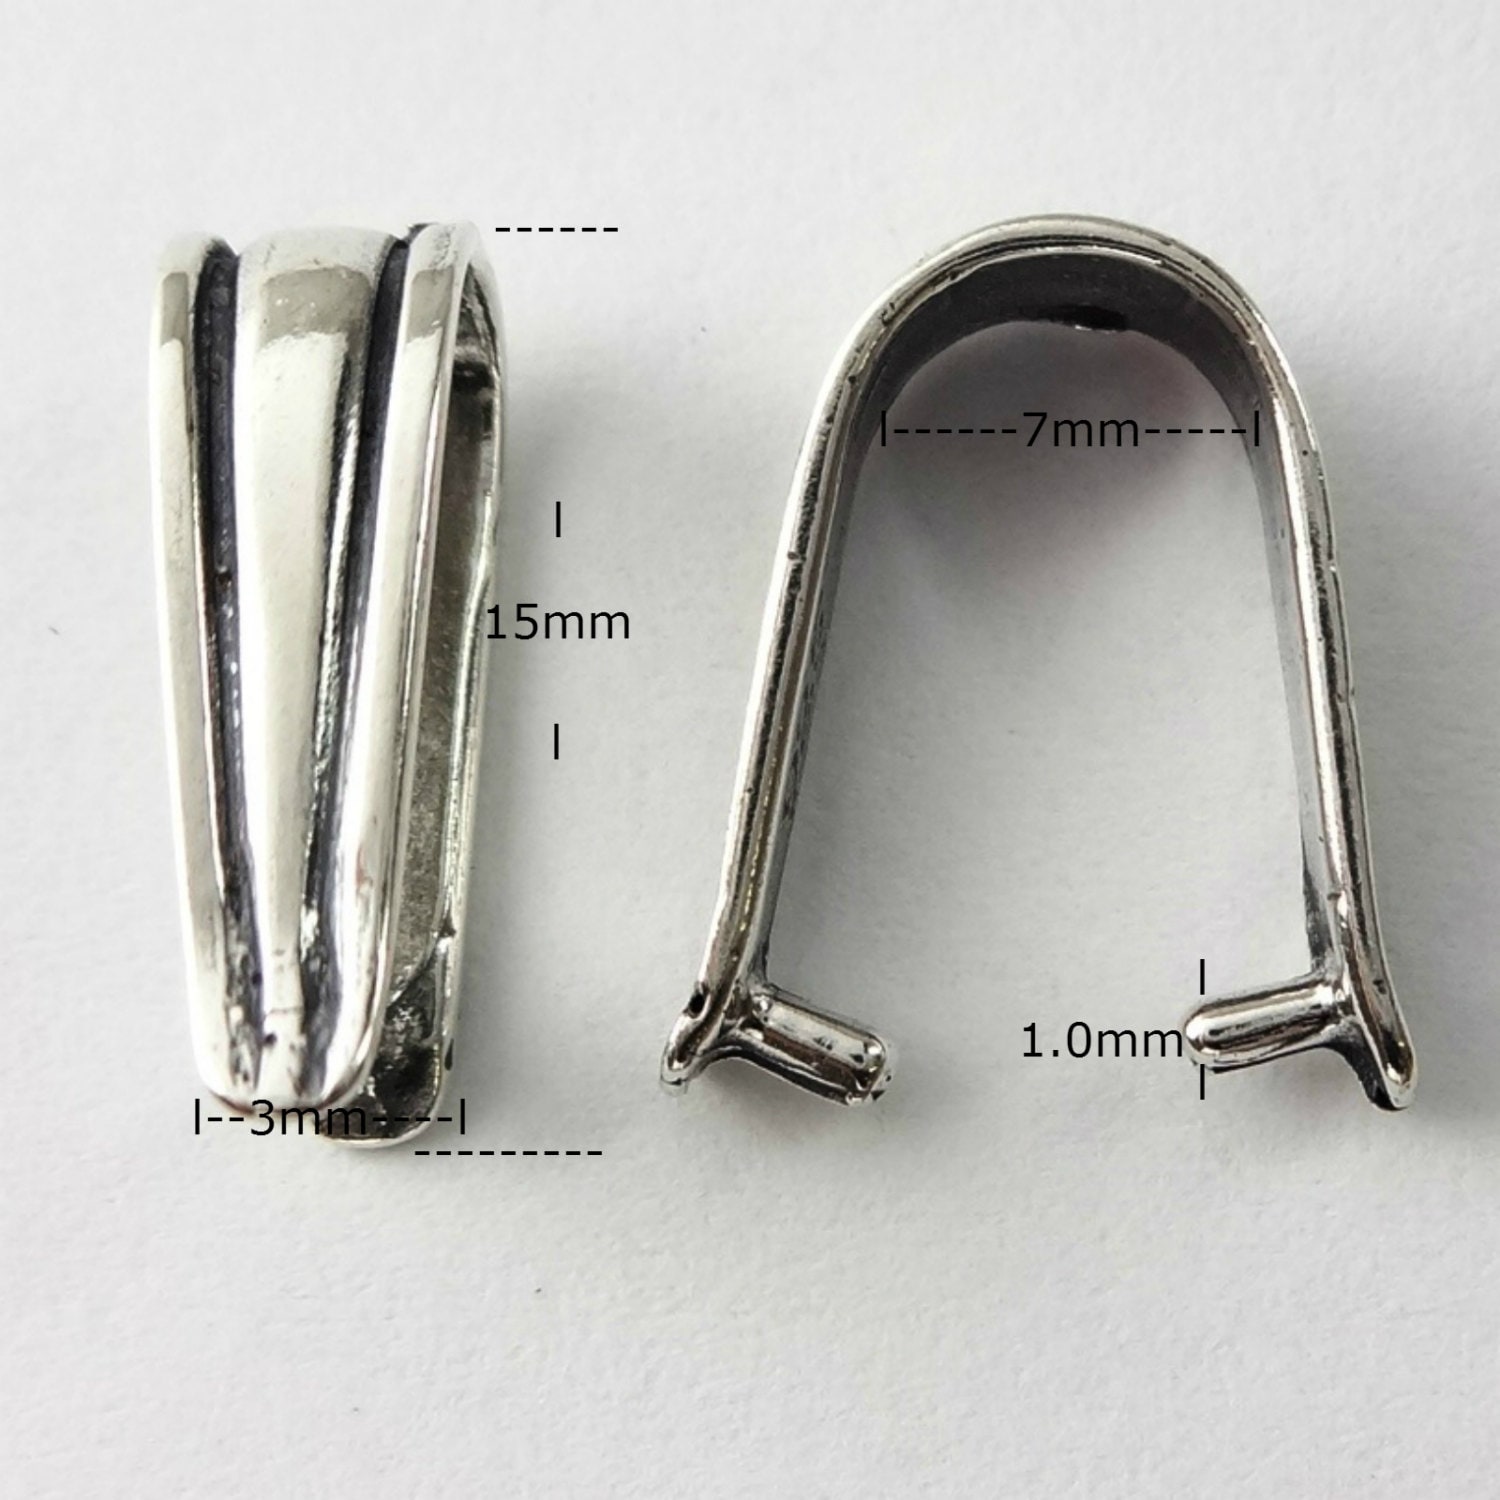 10pcs Sterling Silver Shiny Pinch Bails W/ Hole Bail, S925 Silver 925  Silver Pinch Bail Set, Pendant Bail Jewelry Making Supplies 